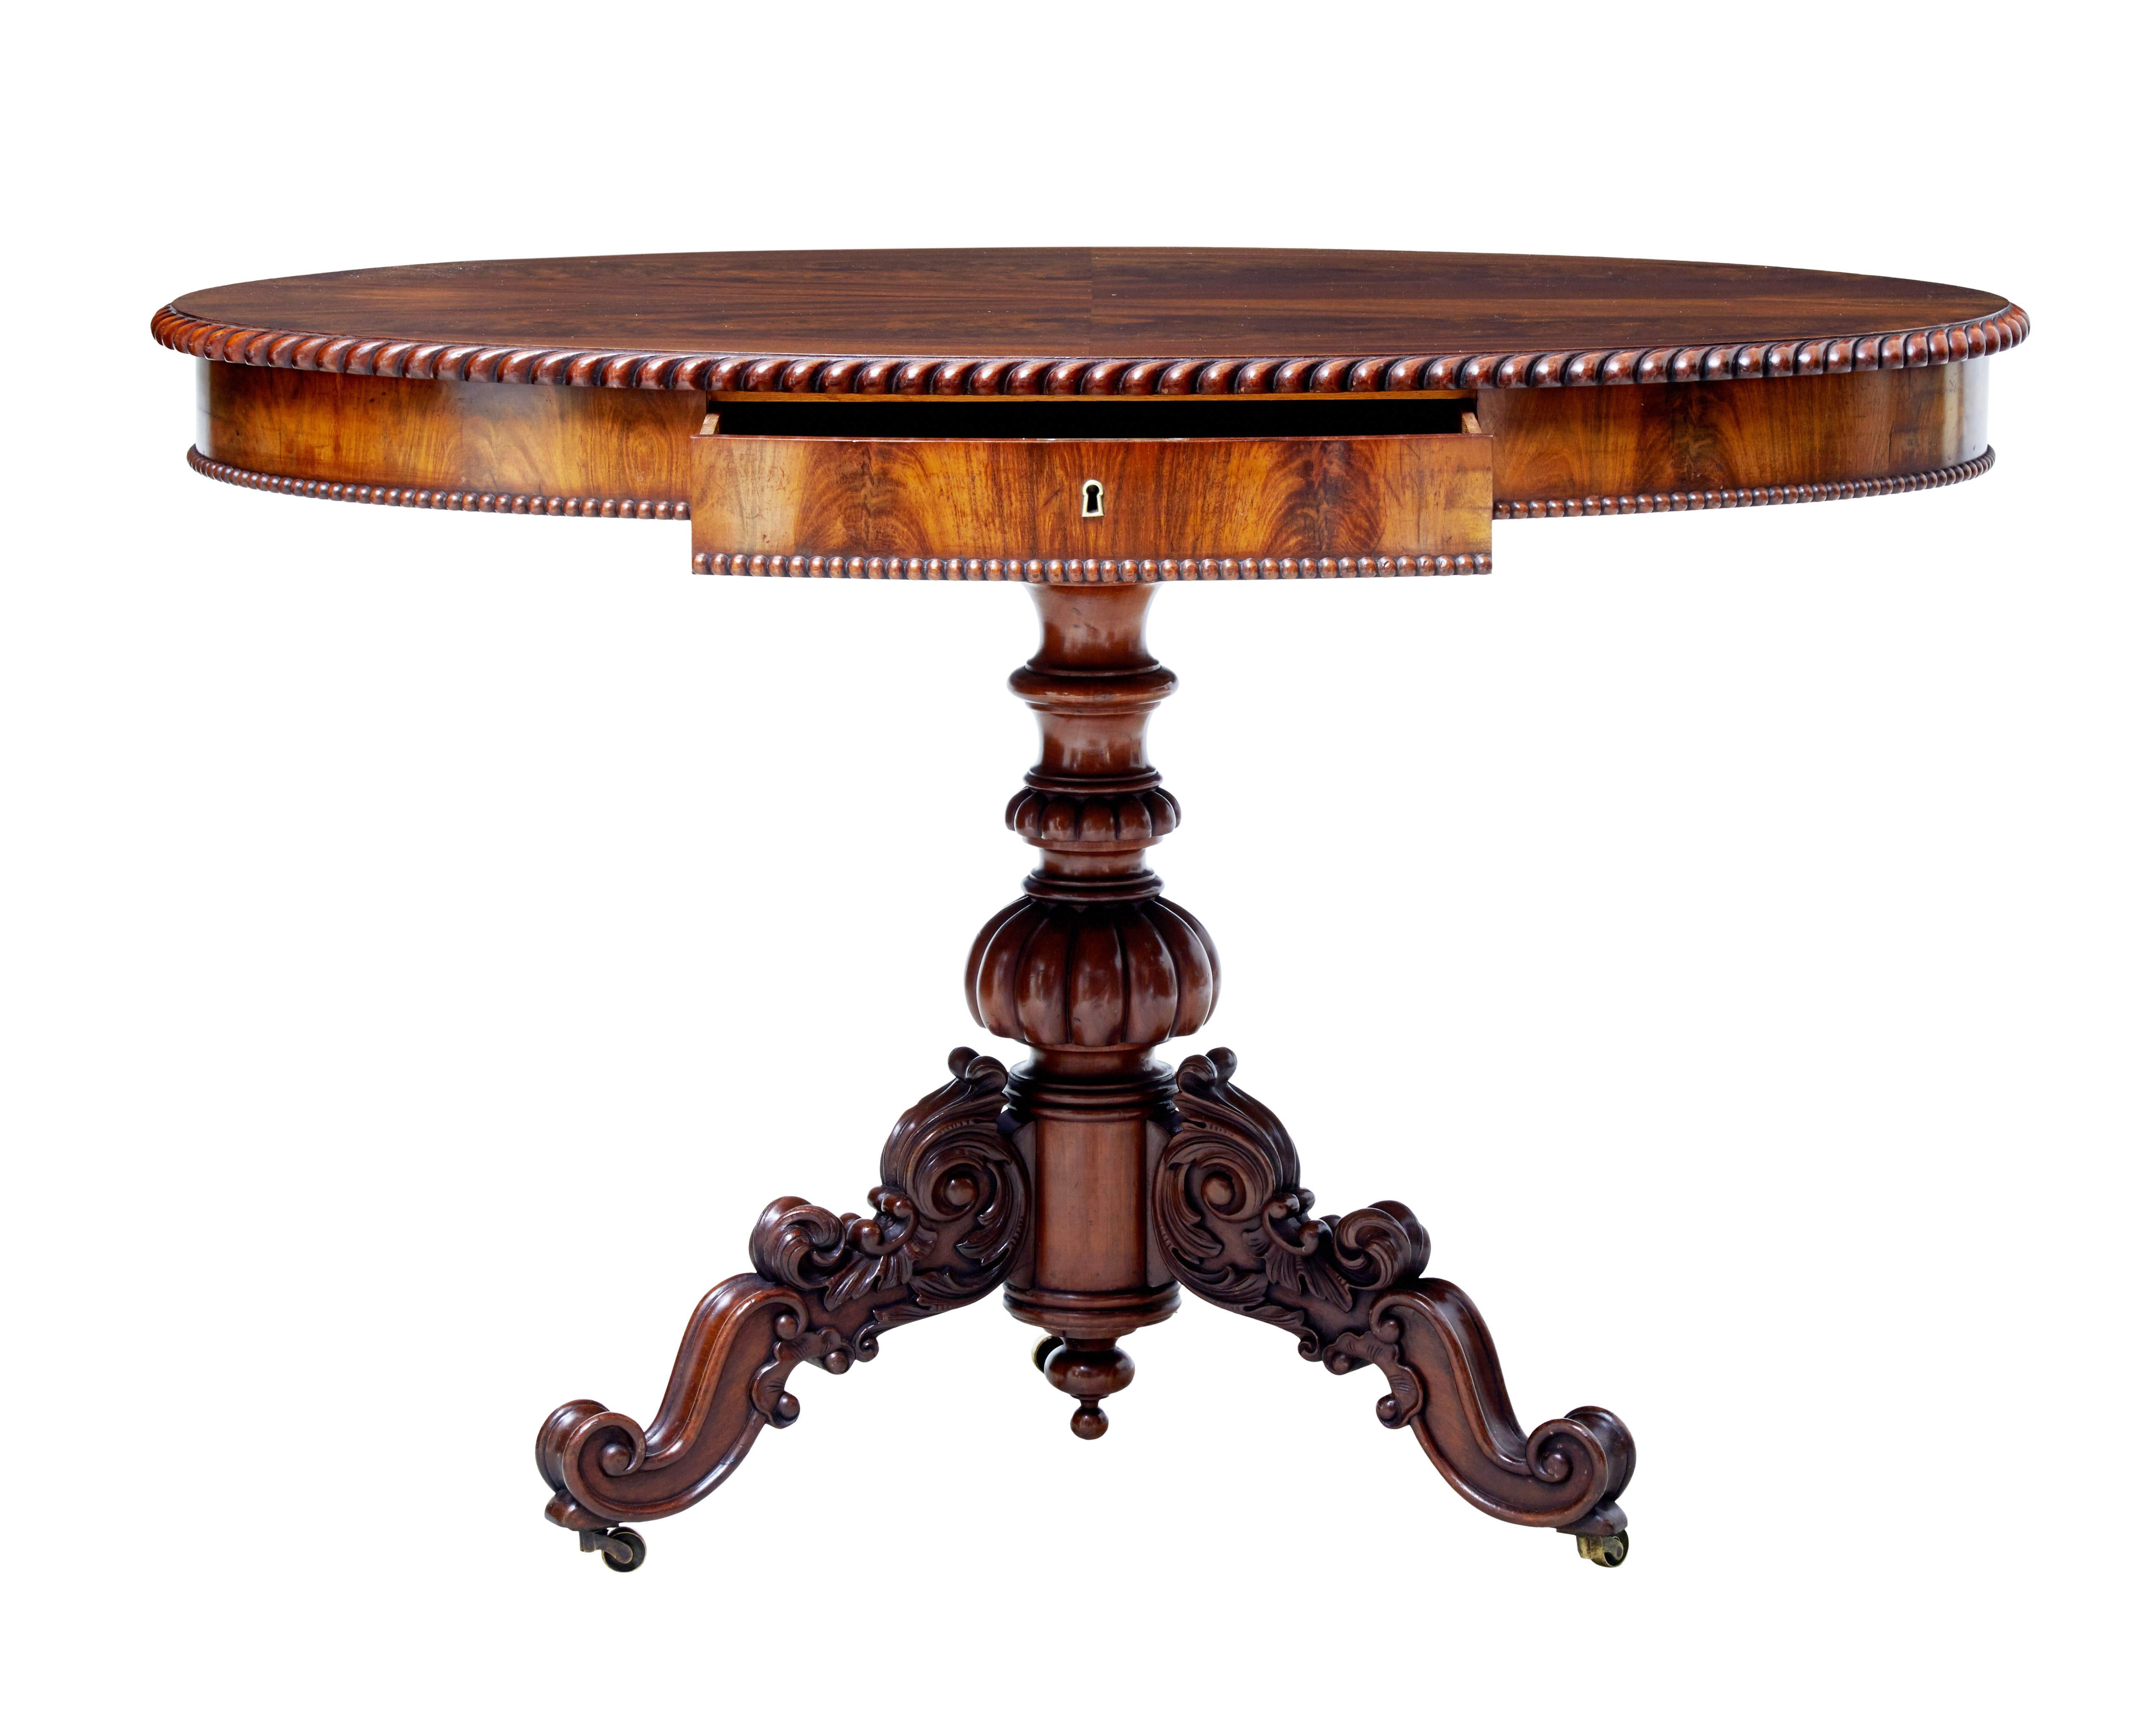 Good quality carved mahogany center table, circa 1880.

Flame mahogany top with gadrooned edging and a beaded lower edge underneath the single drawer.

Turned stem, standing on three carved scrolling legs and brass castors.